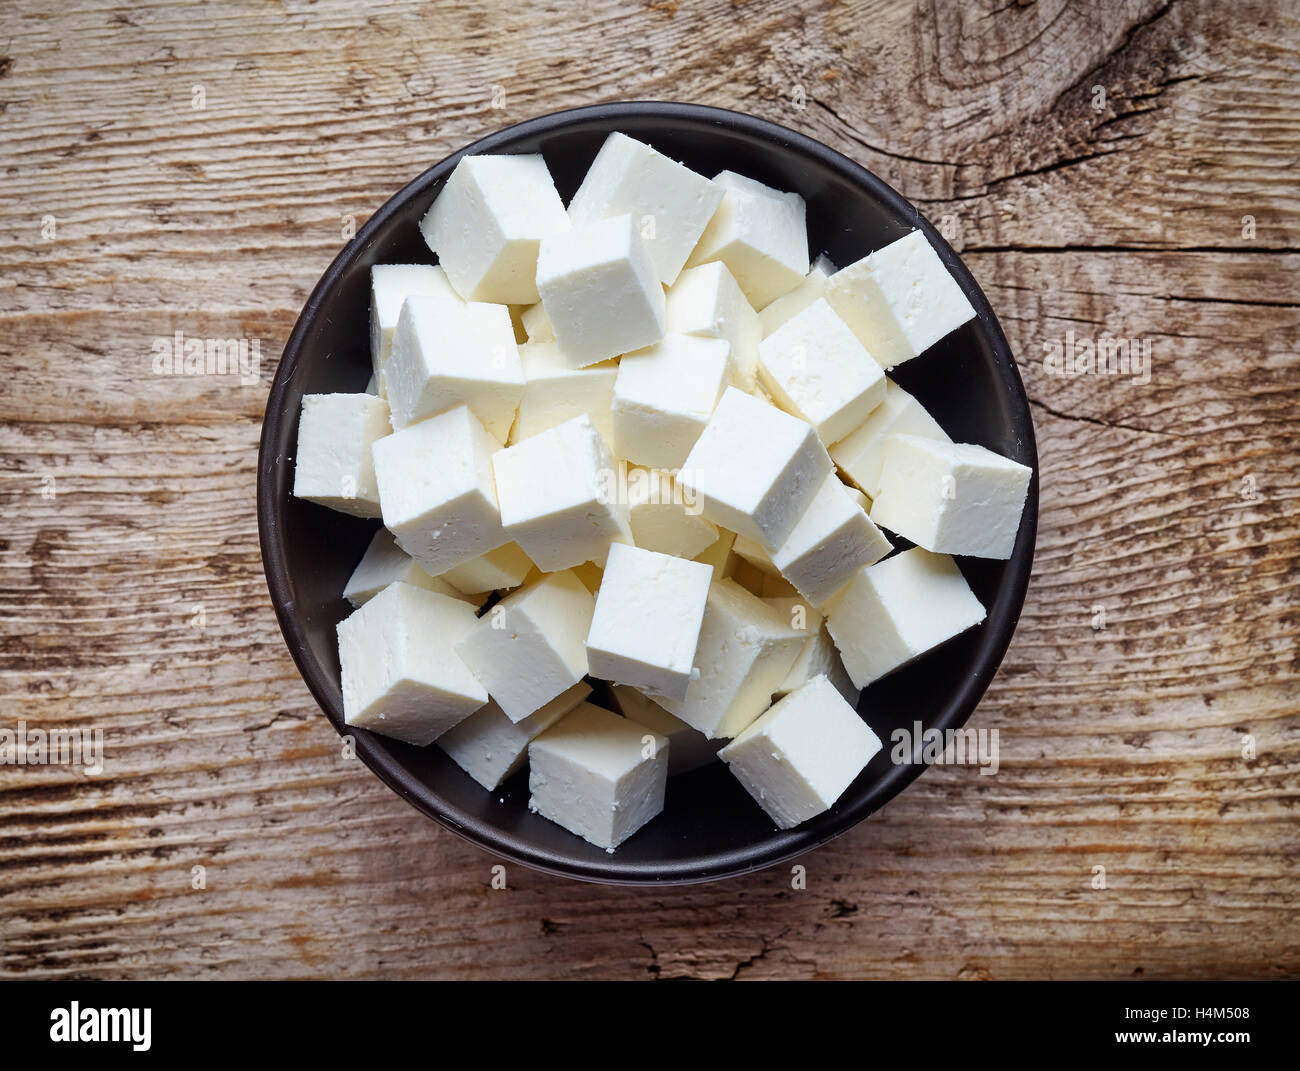 Bowl of diced soft cheese on wooden background, top view Stock Photo